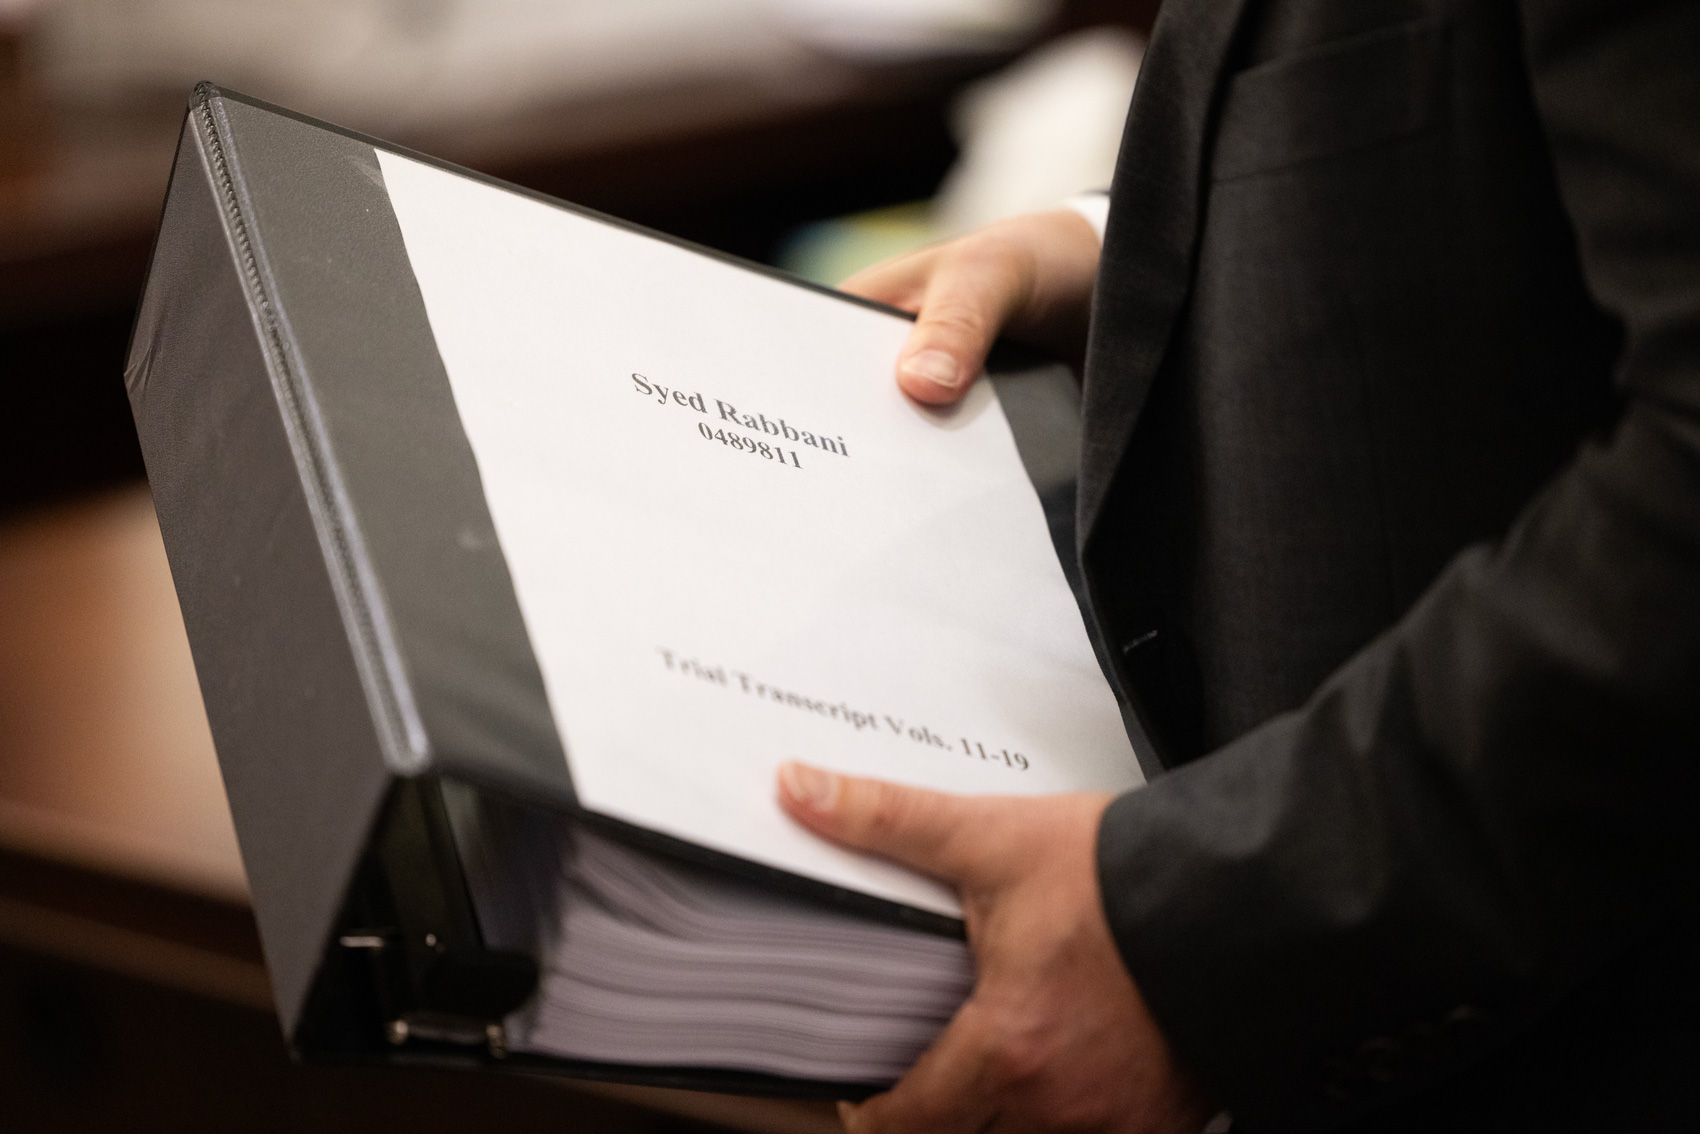 Joshua Reiss, a division chief with the Harris County District Attorney's Office, hands Judge Lori Chambers Gray a copy of Syed Rabbani’s original trail transcript during a hearing for Rabbani at the Harris County Criminal Justice Center, Tuesday, Nov. 14, 2023, in Houston.